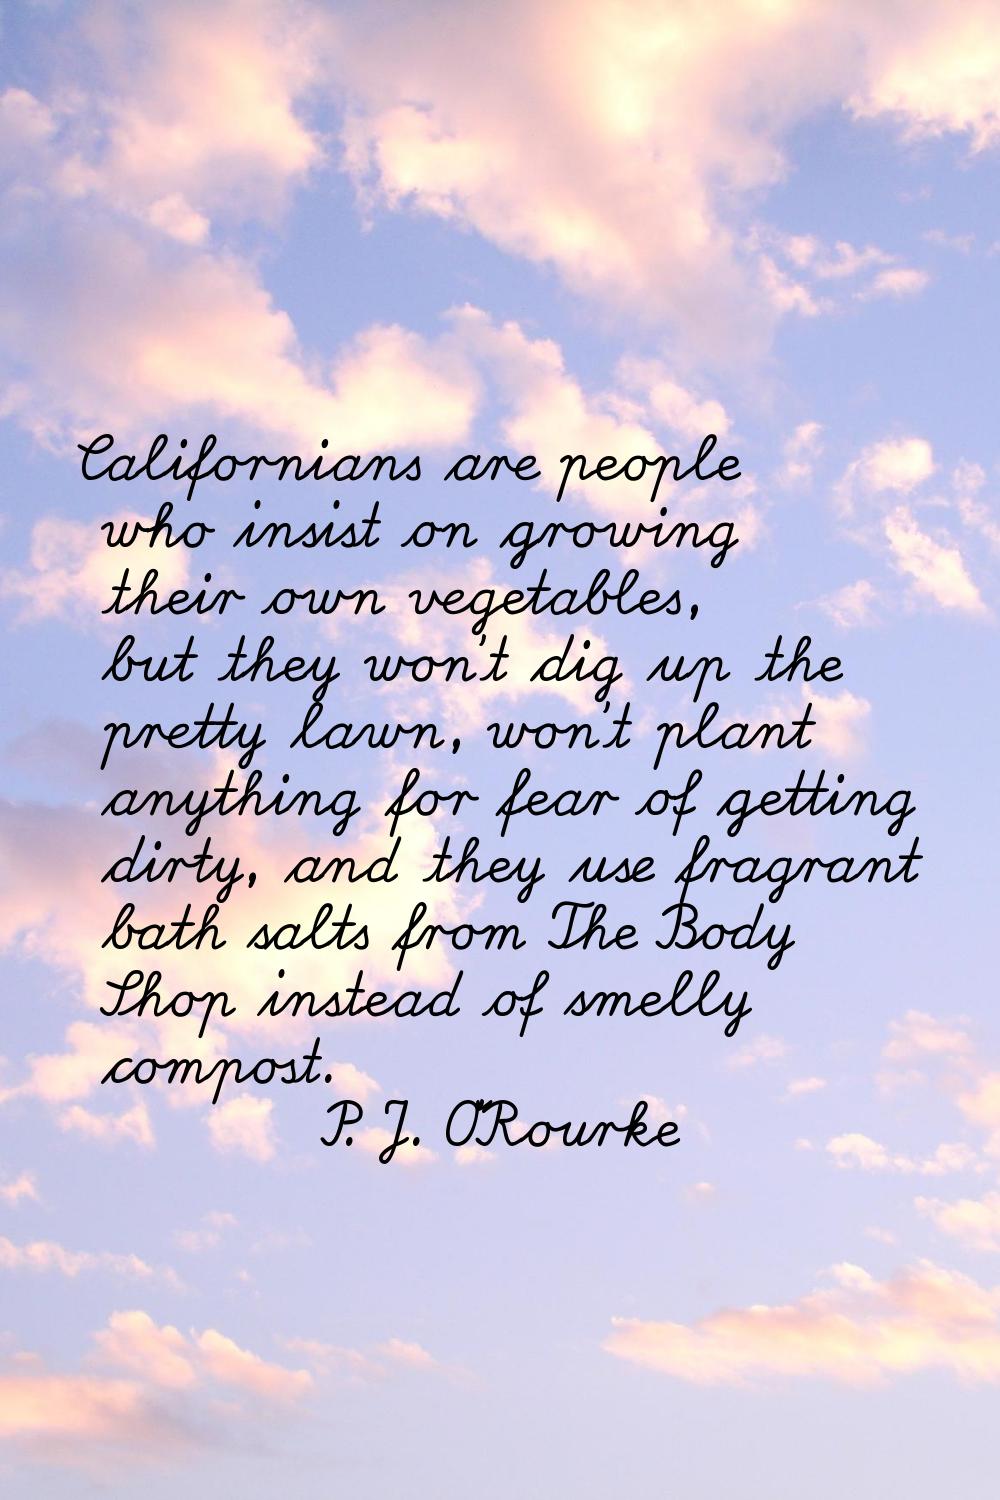 Californians are people who insist on growing their own vegetables, but they won't dig up the prett